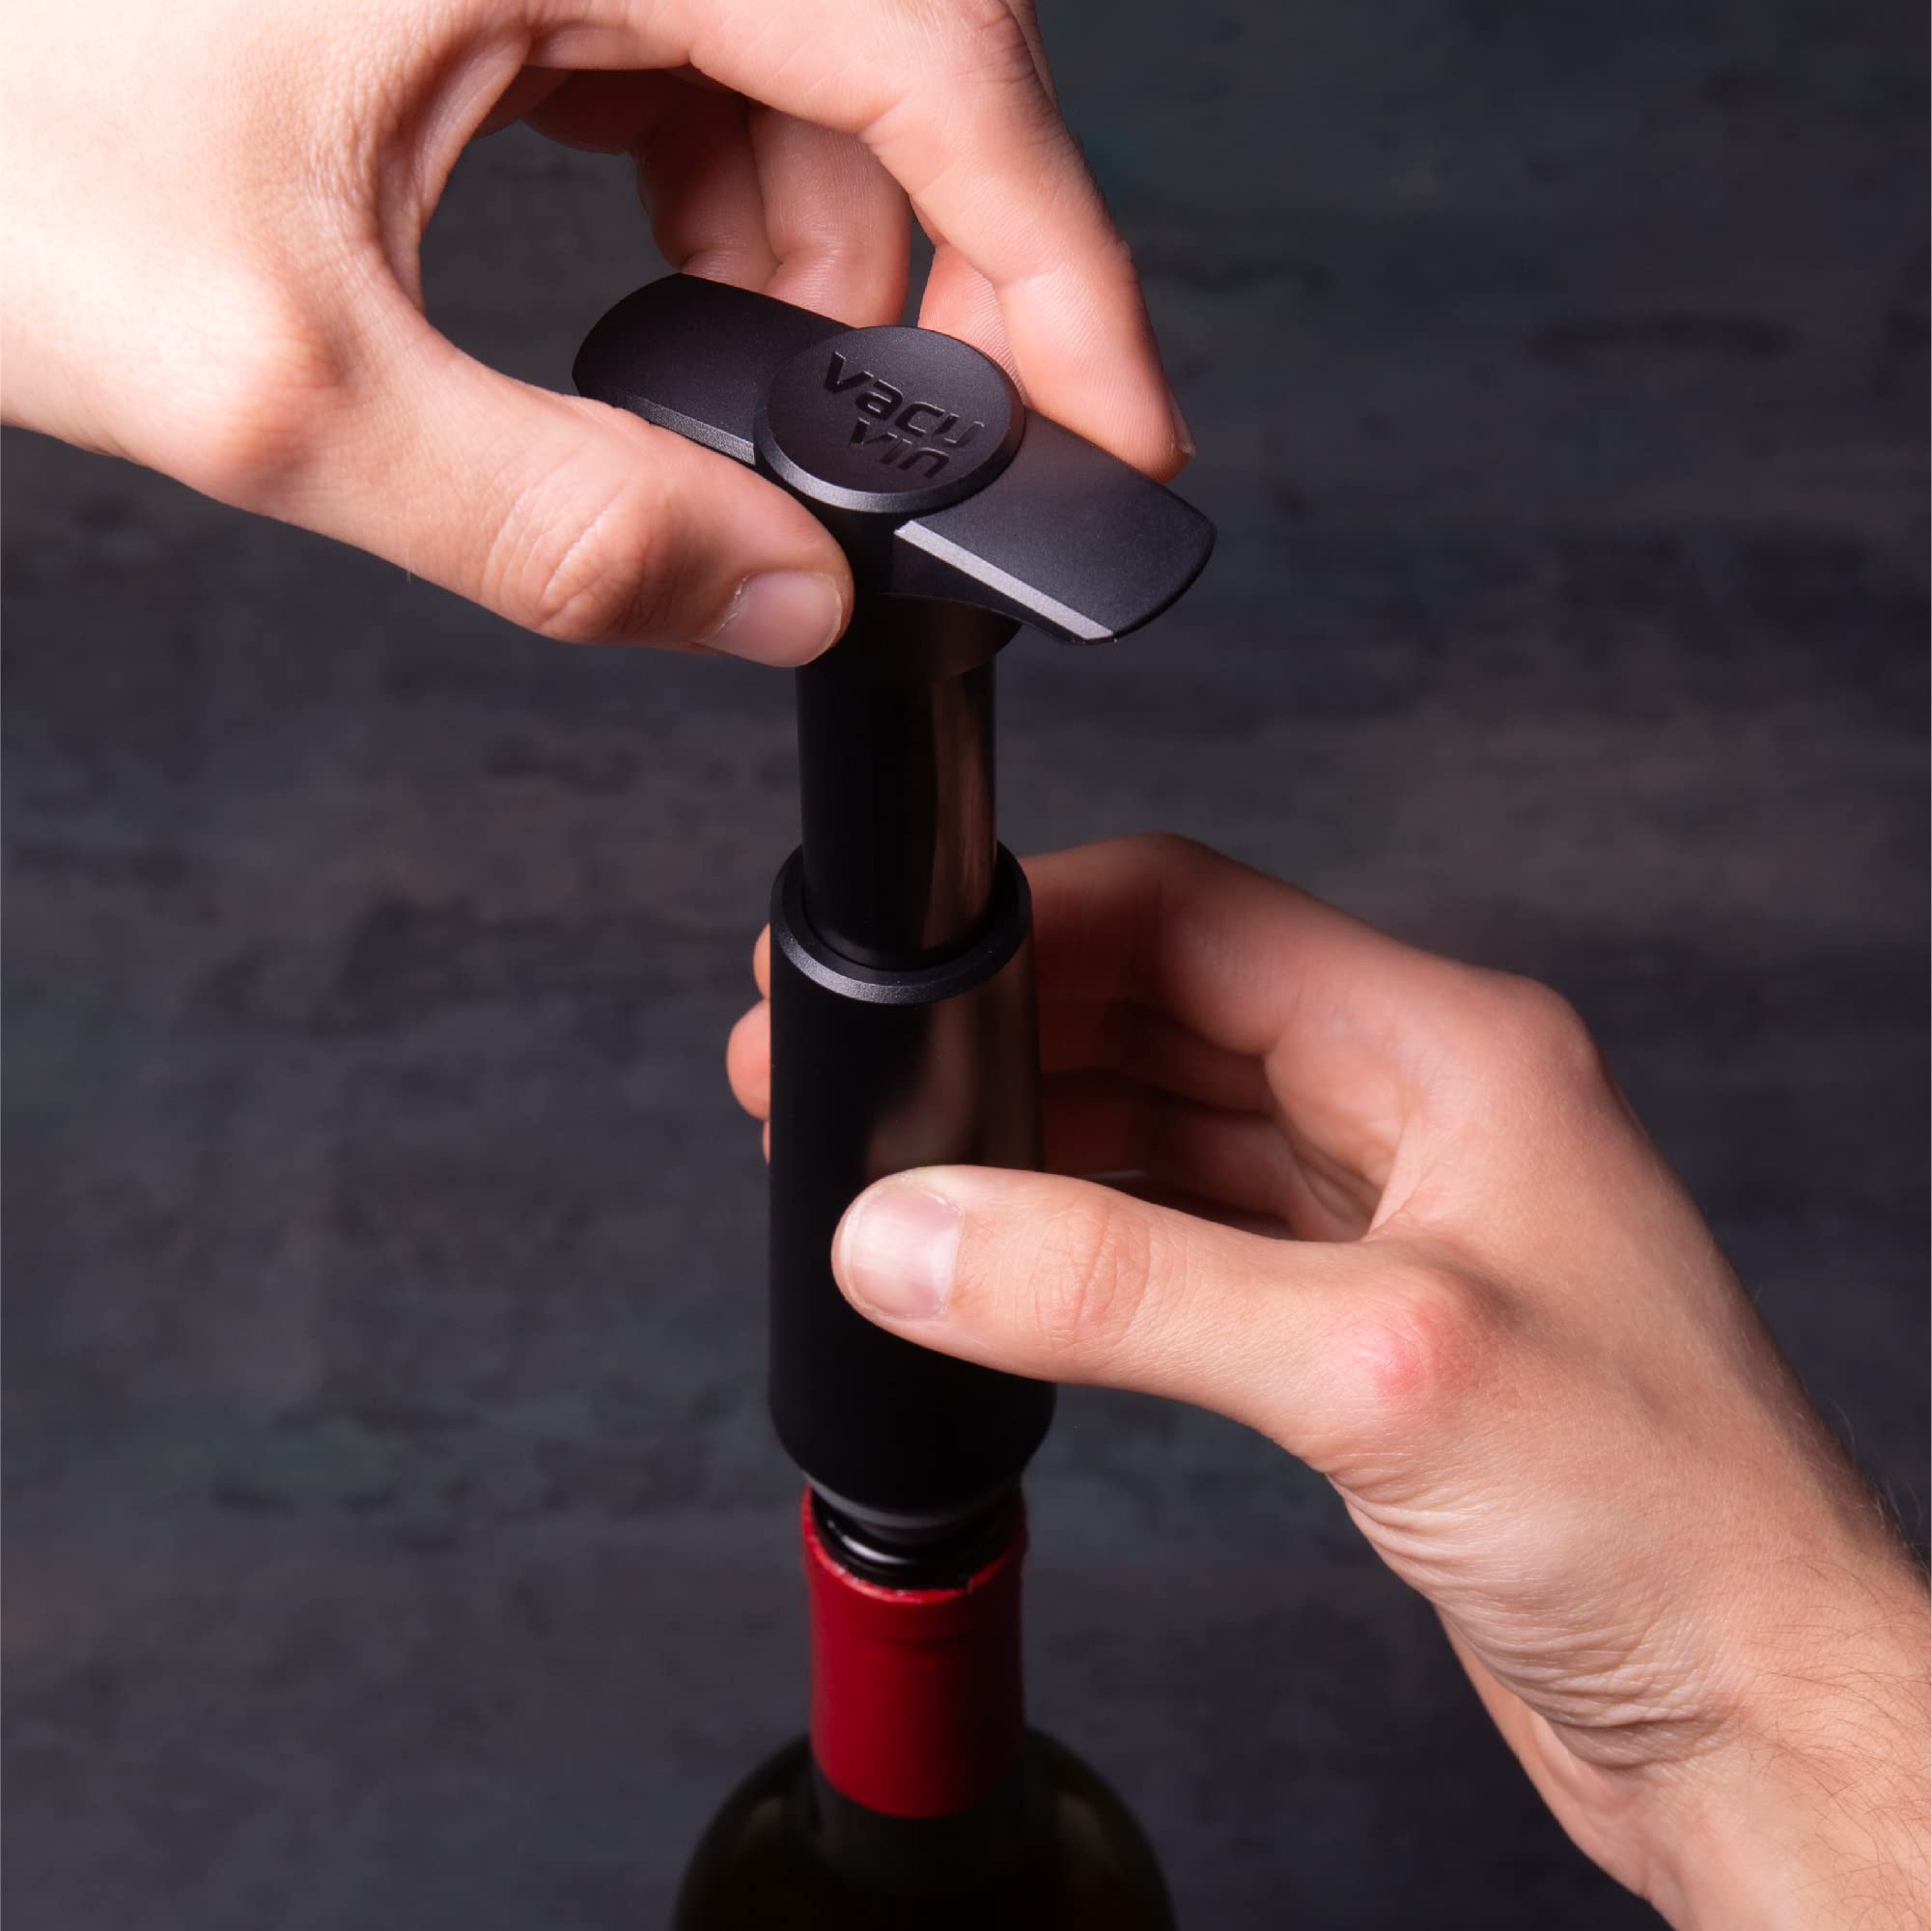 Vacu Vin Wine Saver Pump Red with Vacuum Wine Stopper - Keep Your Wine Fresh for up to 10 Days - 1 Pump 4 Stoppers - Reusable - Made in the Netherlands